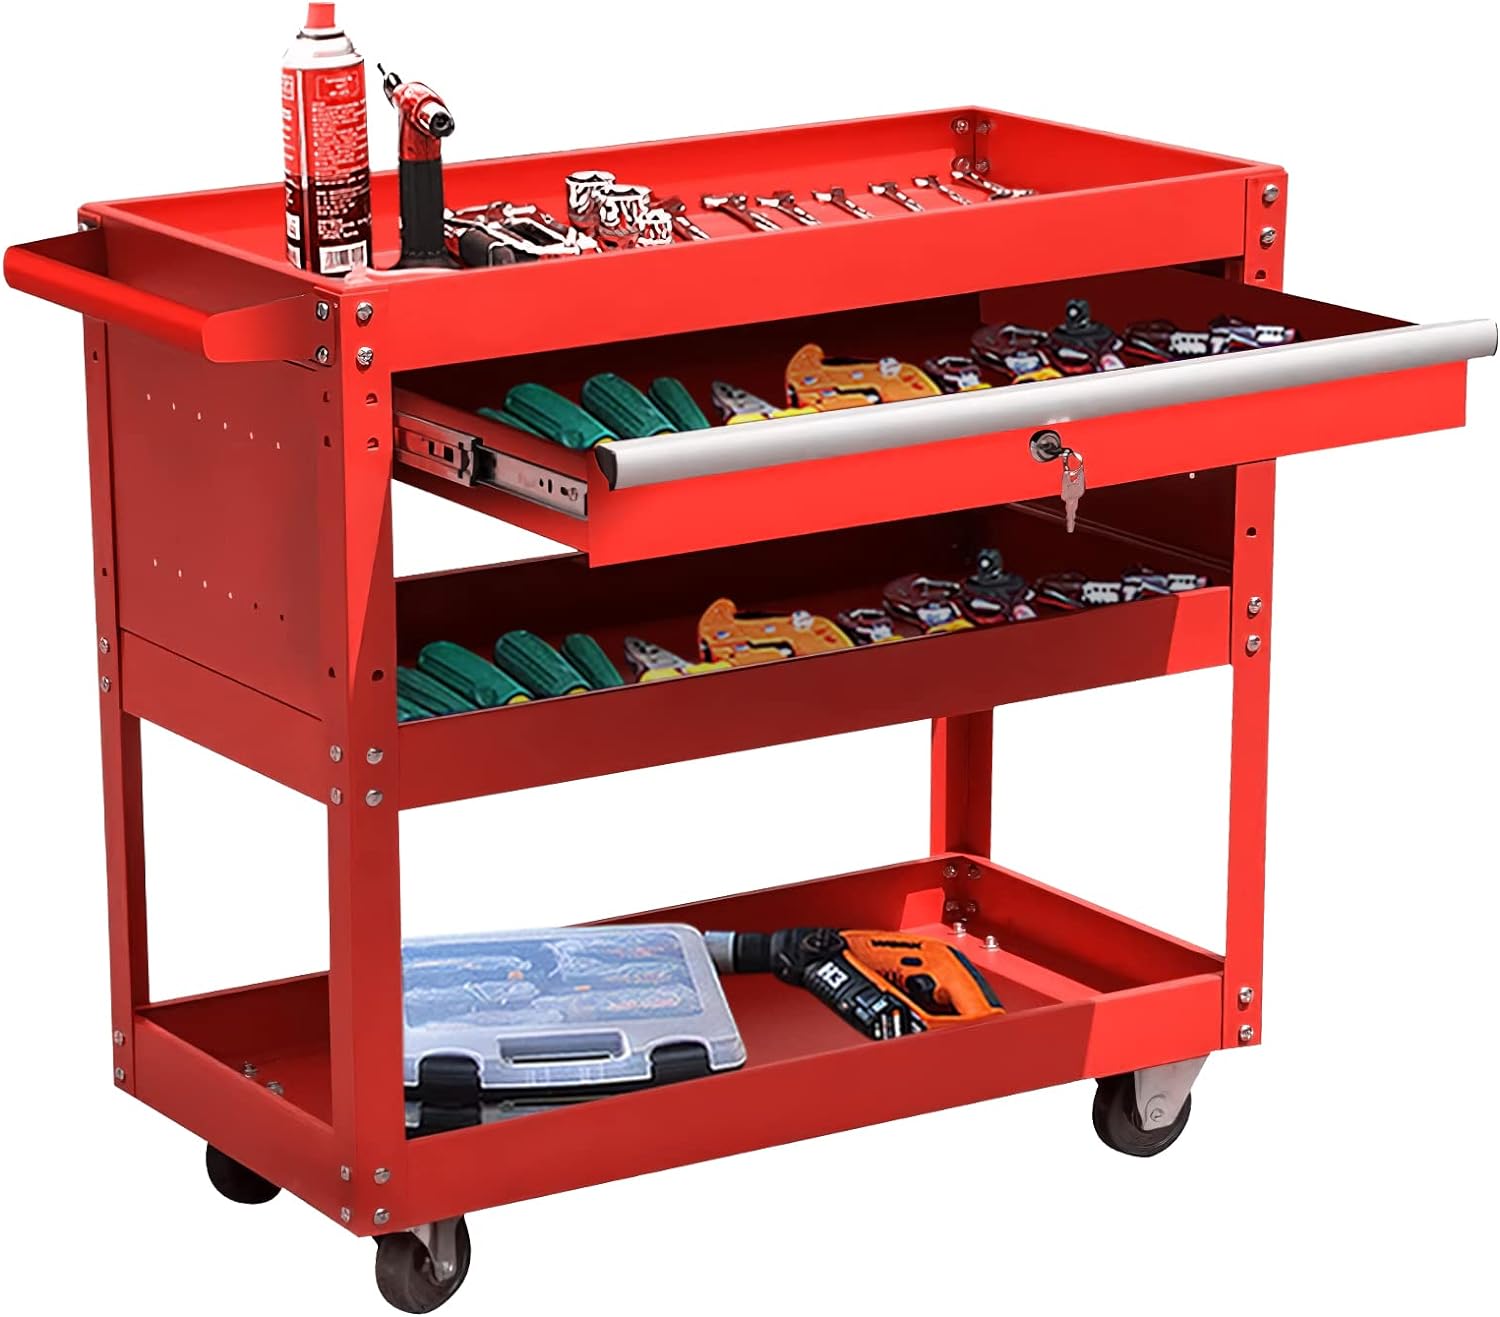 Wanmwill 3-Tray Rolling Tool Cart on Wheels, Tool Box with Wheels and Drawers, 300 LBS Utility Tool Storage Cart, Mechanic Tool Cart for